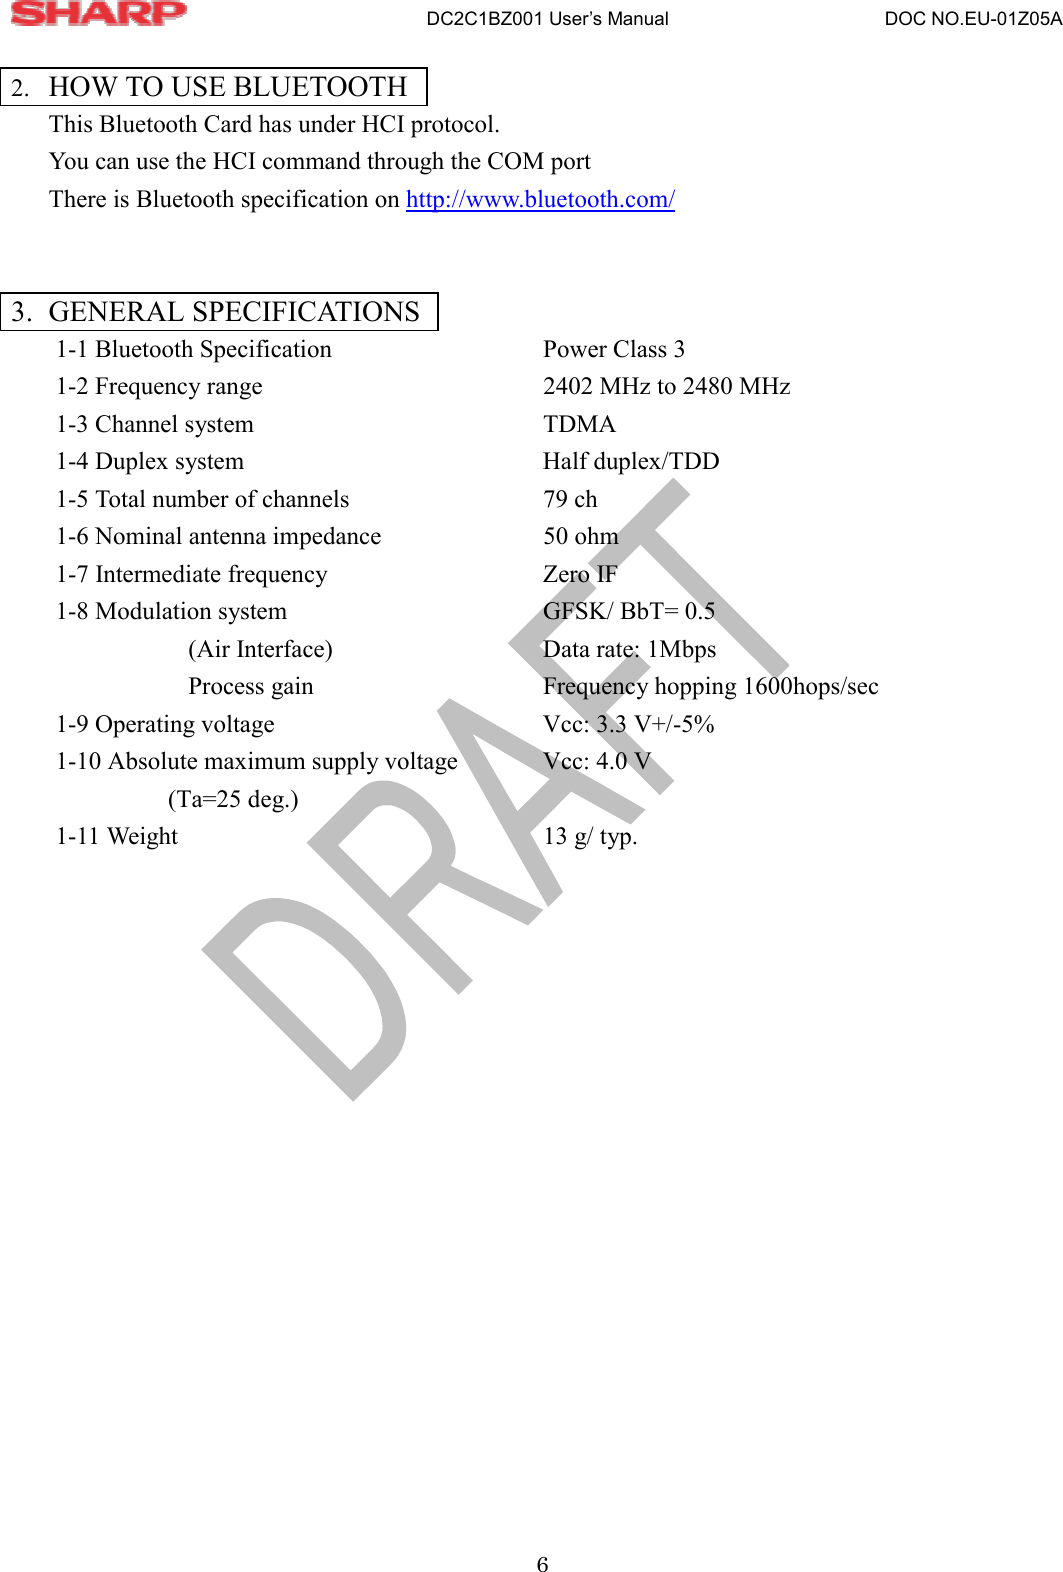                       DC2C1BZ001 User’s Manual                       DOC NO.EU-01Z05A 6  2.  HOW TO USE BLUETOOTH This Bluetooth Card has under HCI protocol. You can use the HCI command through the COM port   There is Bluetooth specification on http://www.bluetooth.com/    3. GENERAL SPECIFICATIONS 1-1 Bluetooth Specification      Power Class 3 1-2 Frequency range        2402 MHz to 2480 MHz 1-3 Channel system        TDMA 1-4 Duplex system          Half duplex/TDD 1-5 Total number of channels      79 ch 1-6 Nominal antenna impedance    50 ohm 1-7 Intermediate frequency   Zero IF 1-8 Modulation system      GFSK/ BbT= 0.5   (Air Interface)   Data rate: 1Mbps Process gain   Frequency hopping 1600hops/sec 1-9 Operating voltage       Vcc: 3.3 V+/-5% 1-10 Absolute maximum supply voltage    Vcc: 4.0 V          (Ta=25 deg.)   1-11 Weight     13 g/ typ.   